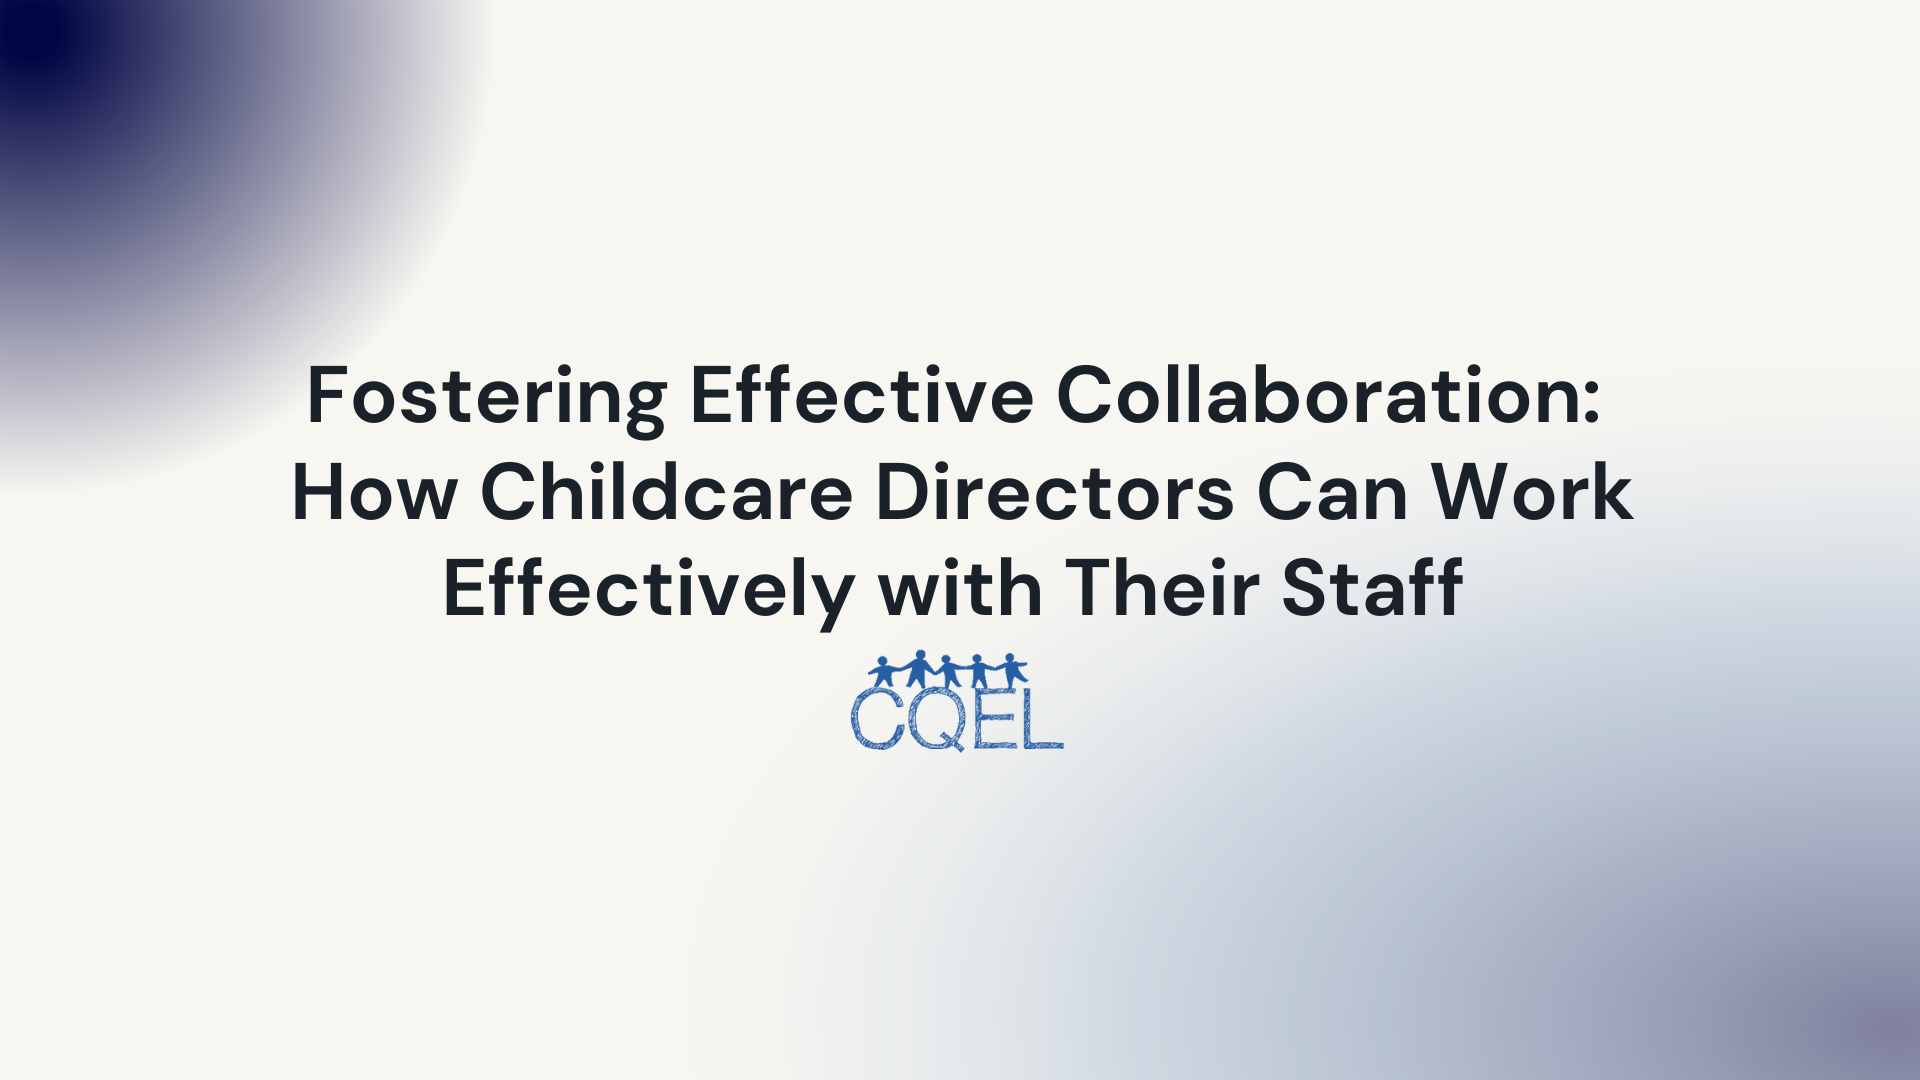 Fostering Effective Collaboration: How Childcare Directors Can Work Effectively with Their Staff in California